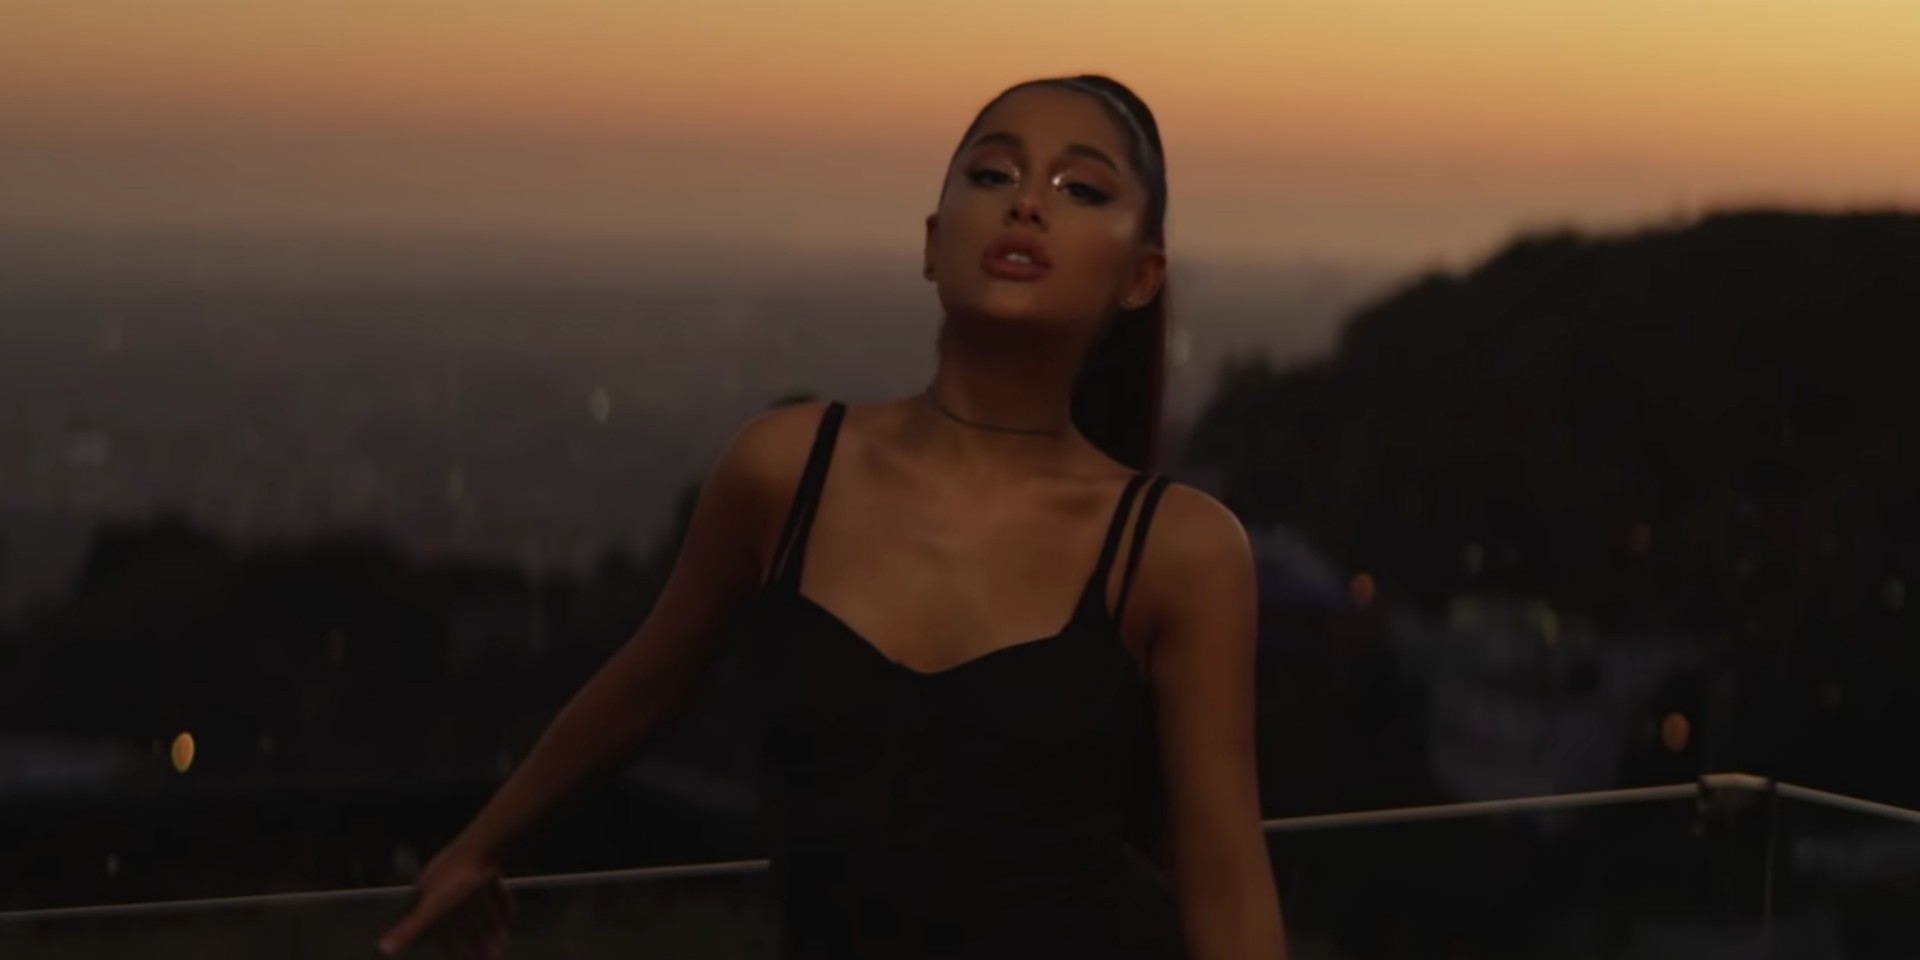 Ariana Grande releases new album thank u, next, shares music video for 'break up with your girlfriend, i'm bored'